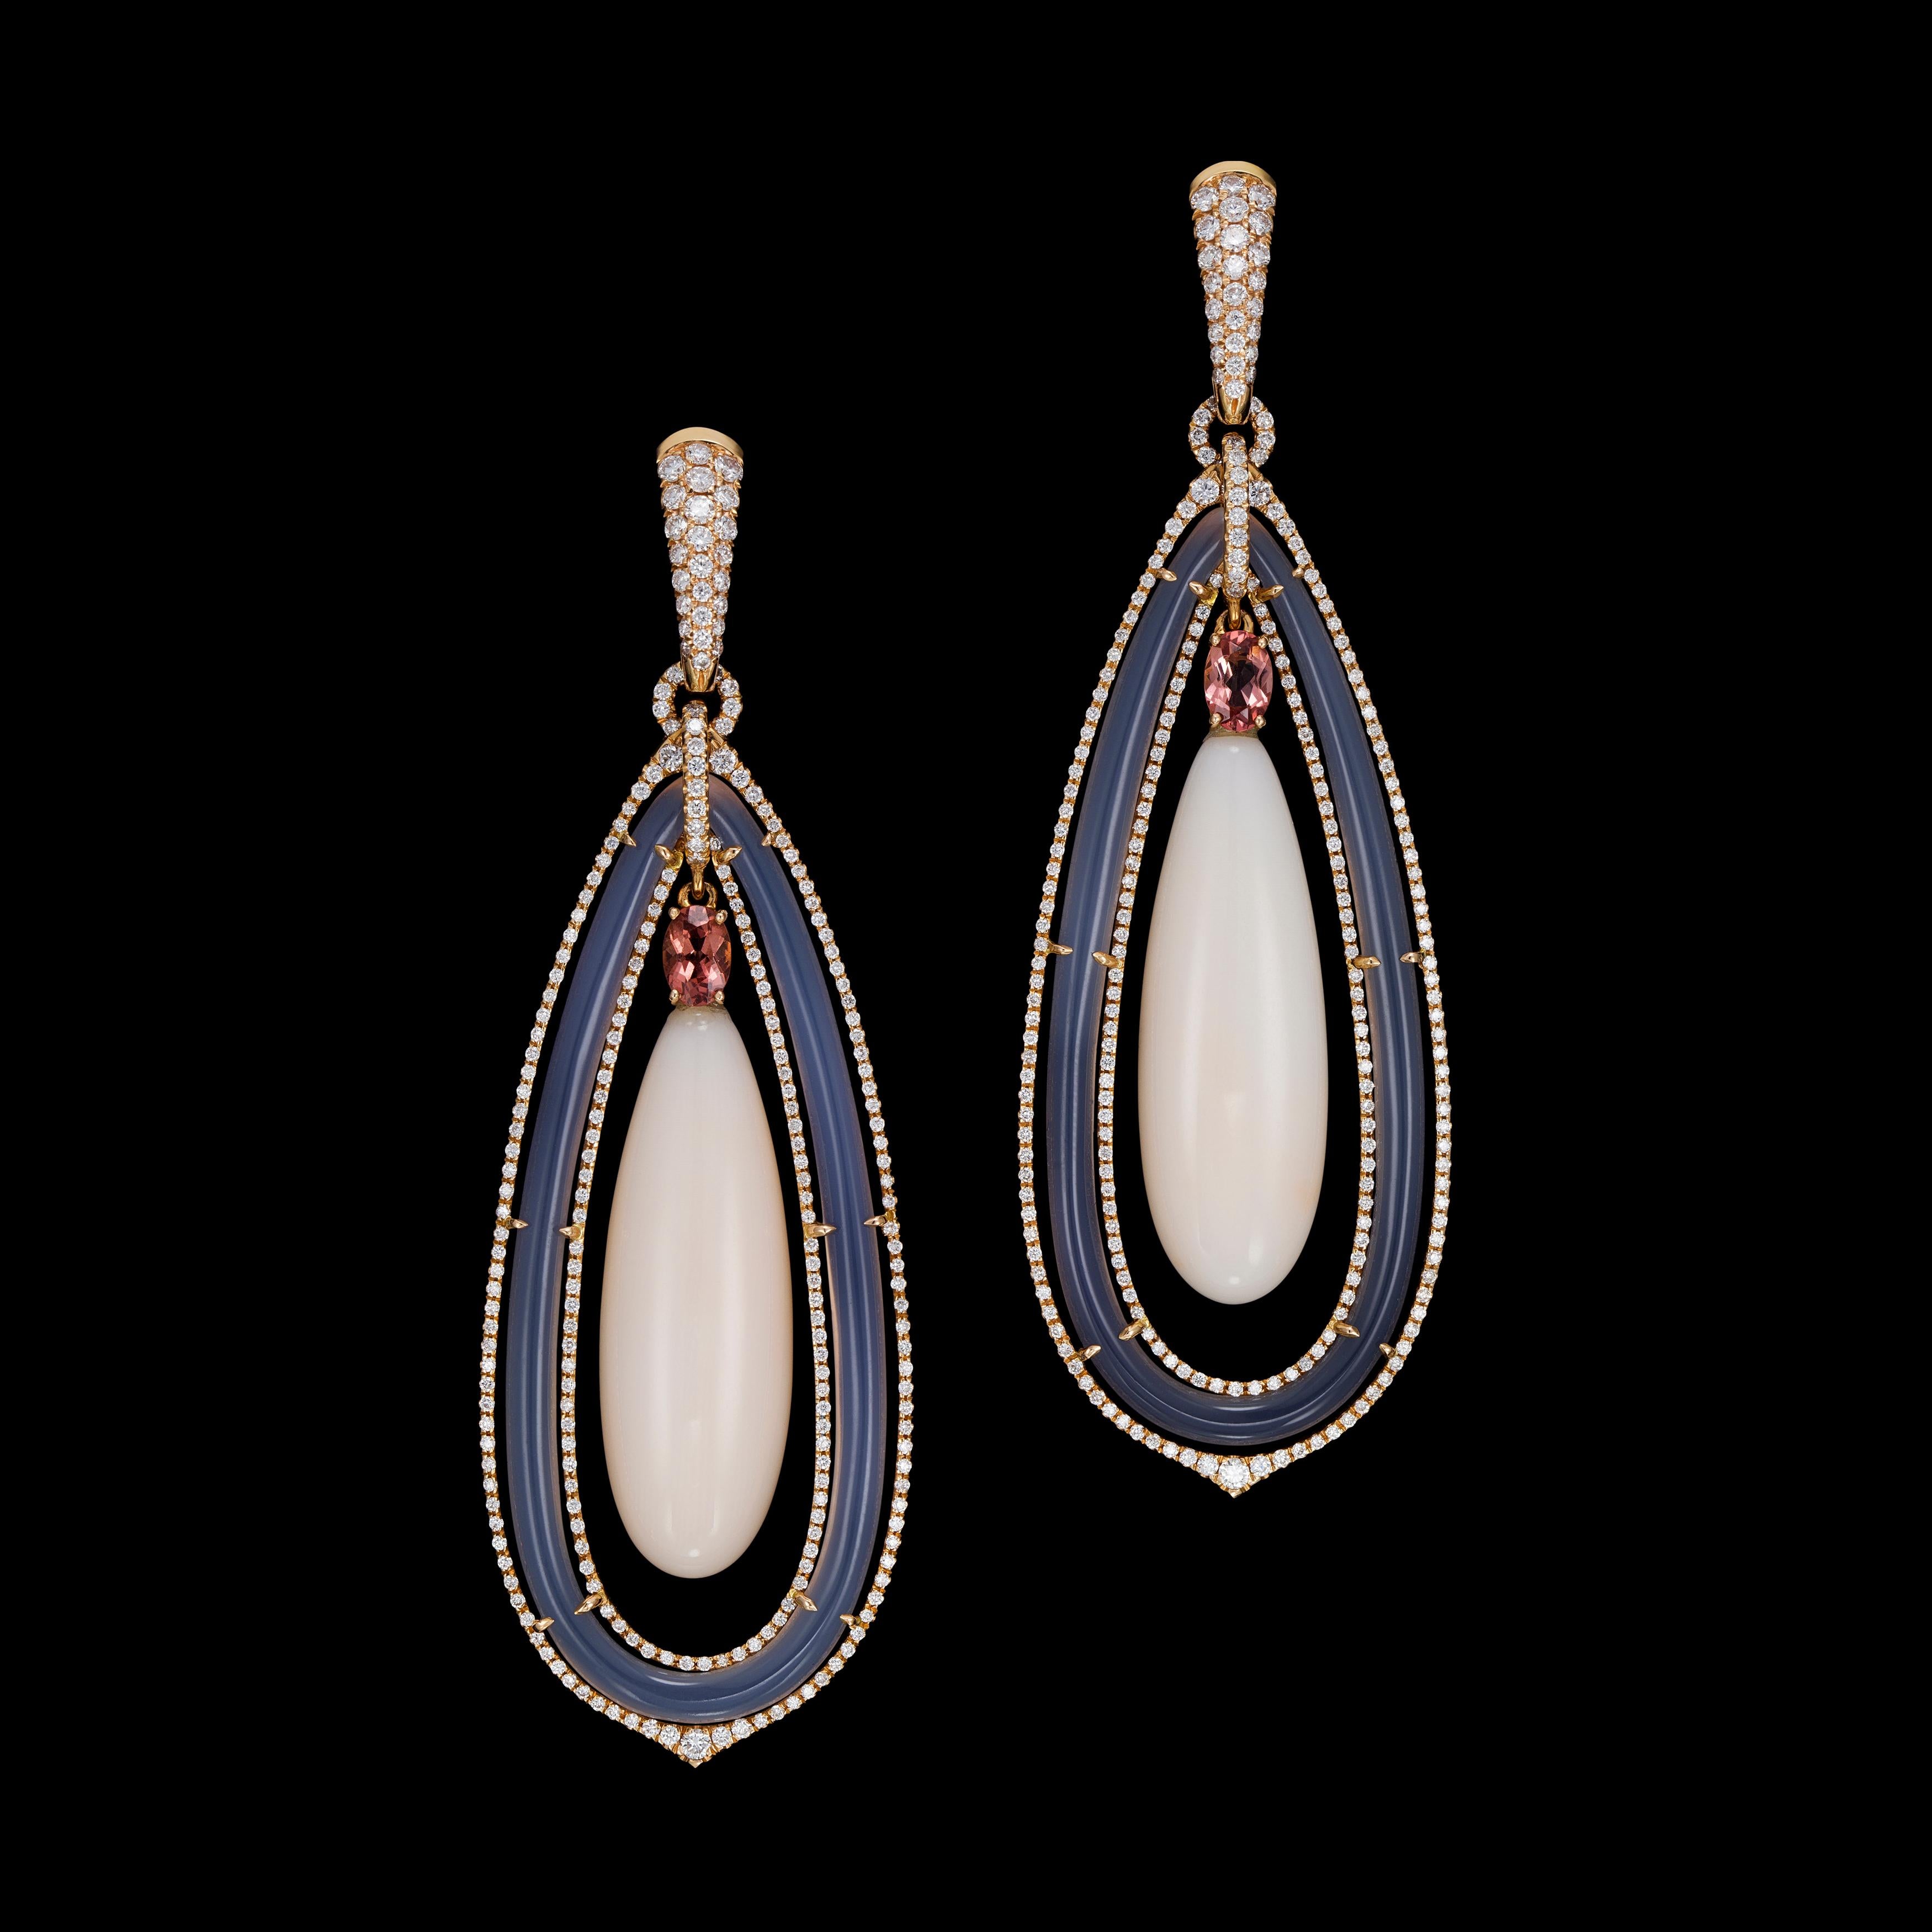 Long coral, grey agate, diamond and pink tourmaline drop earrings and a small pave setting.